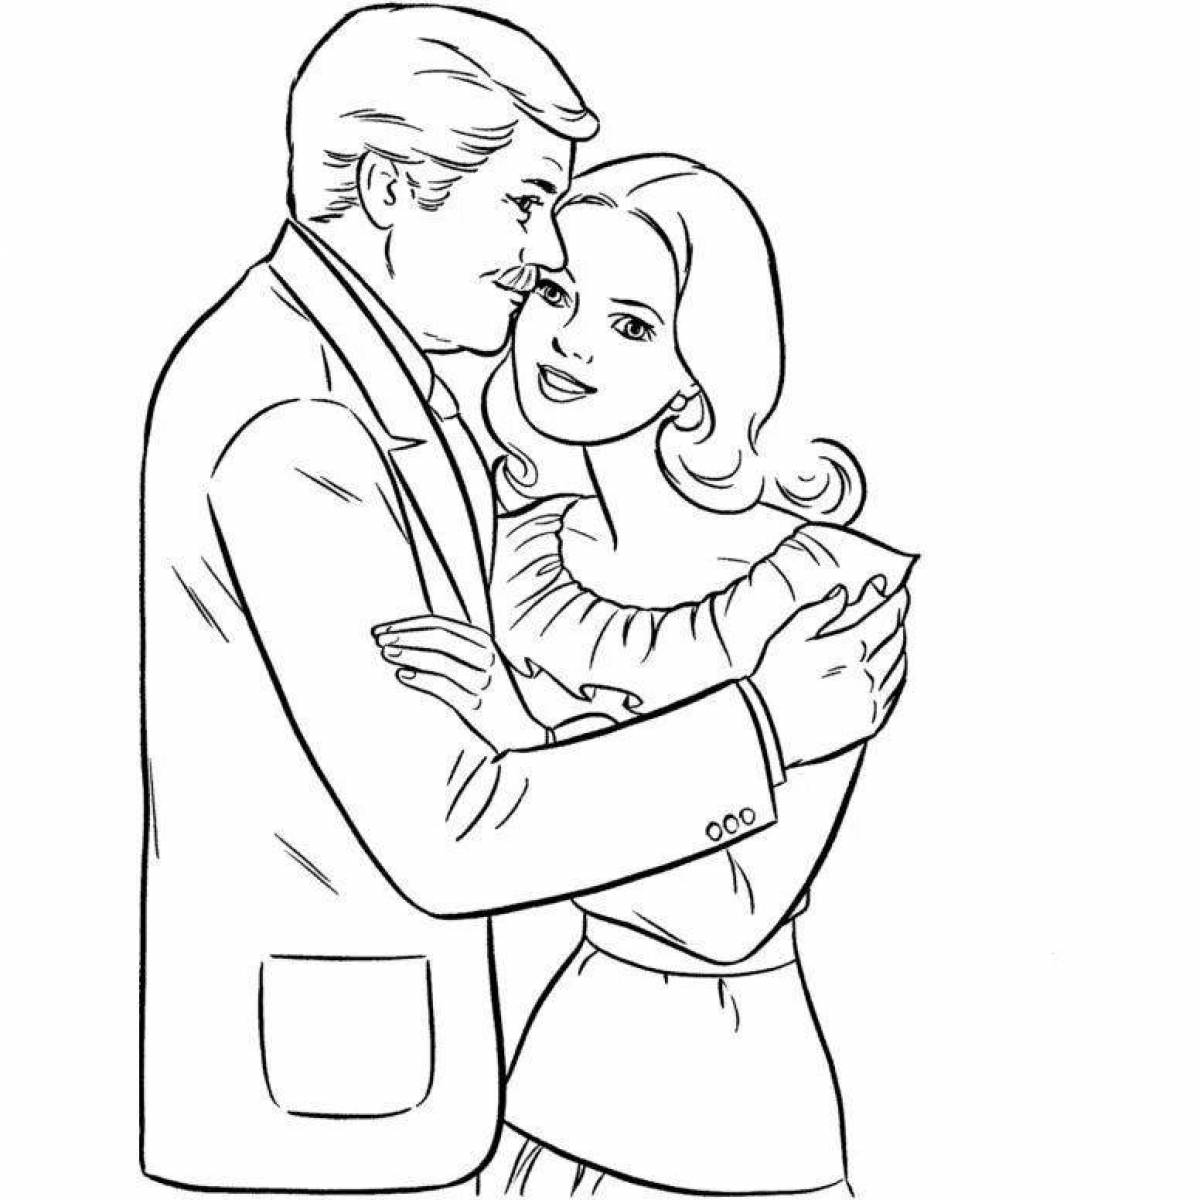 Coloring page playful dad and daughter